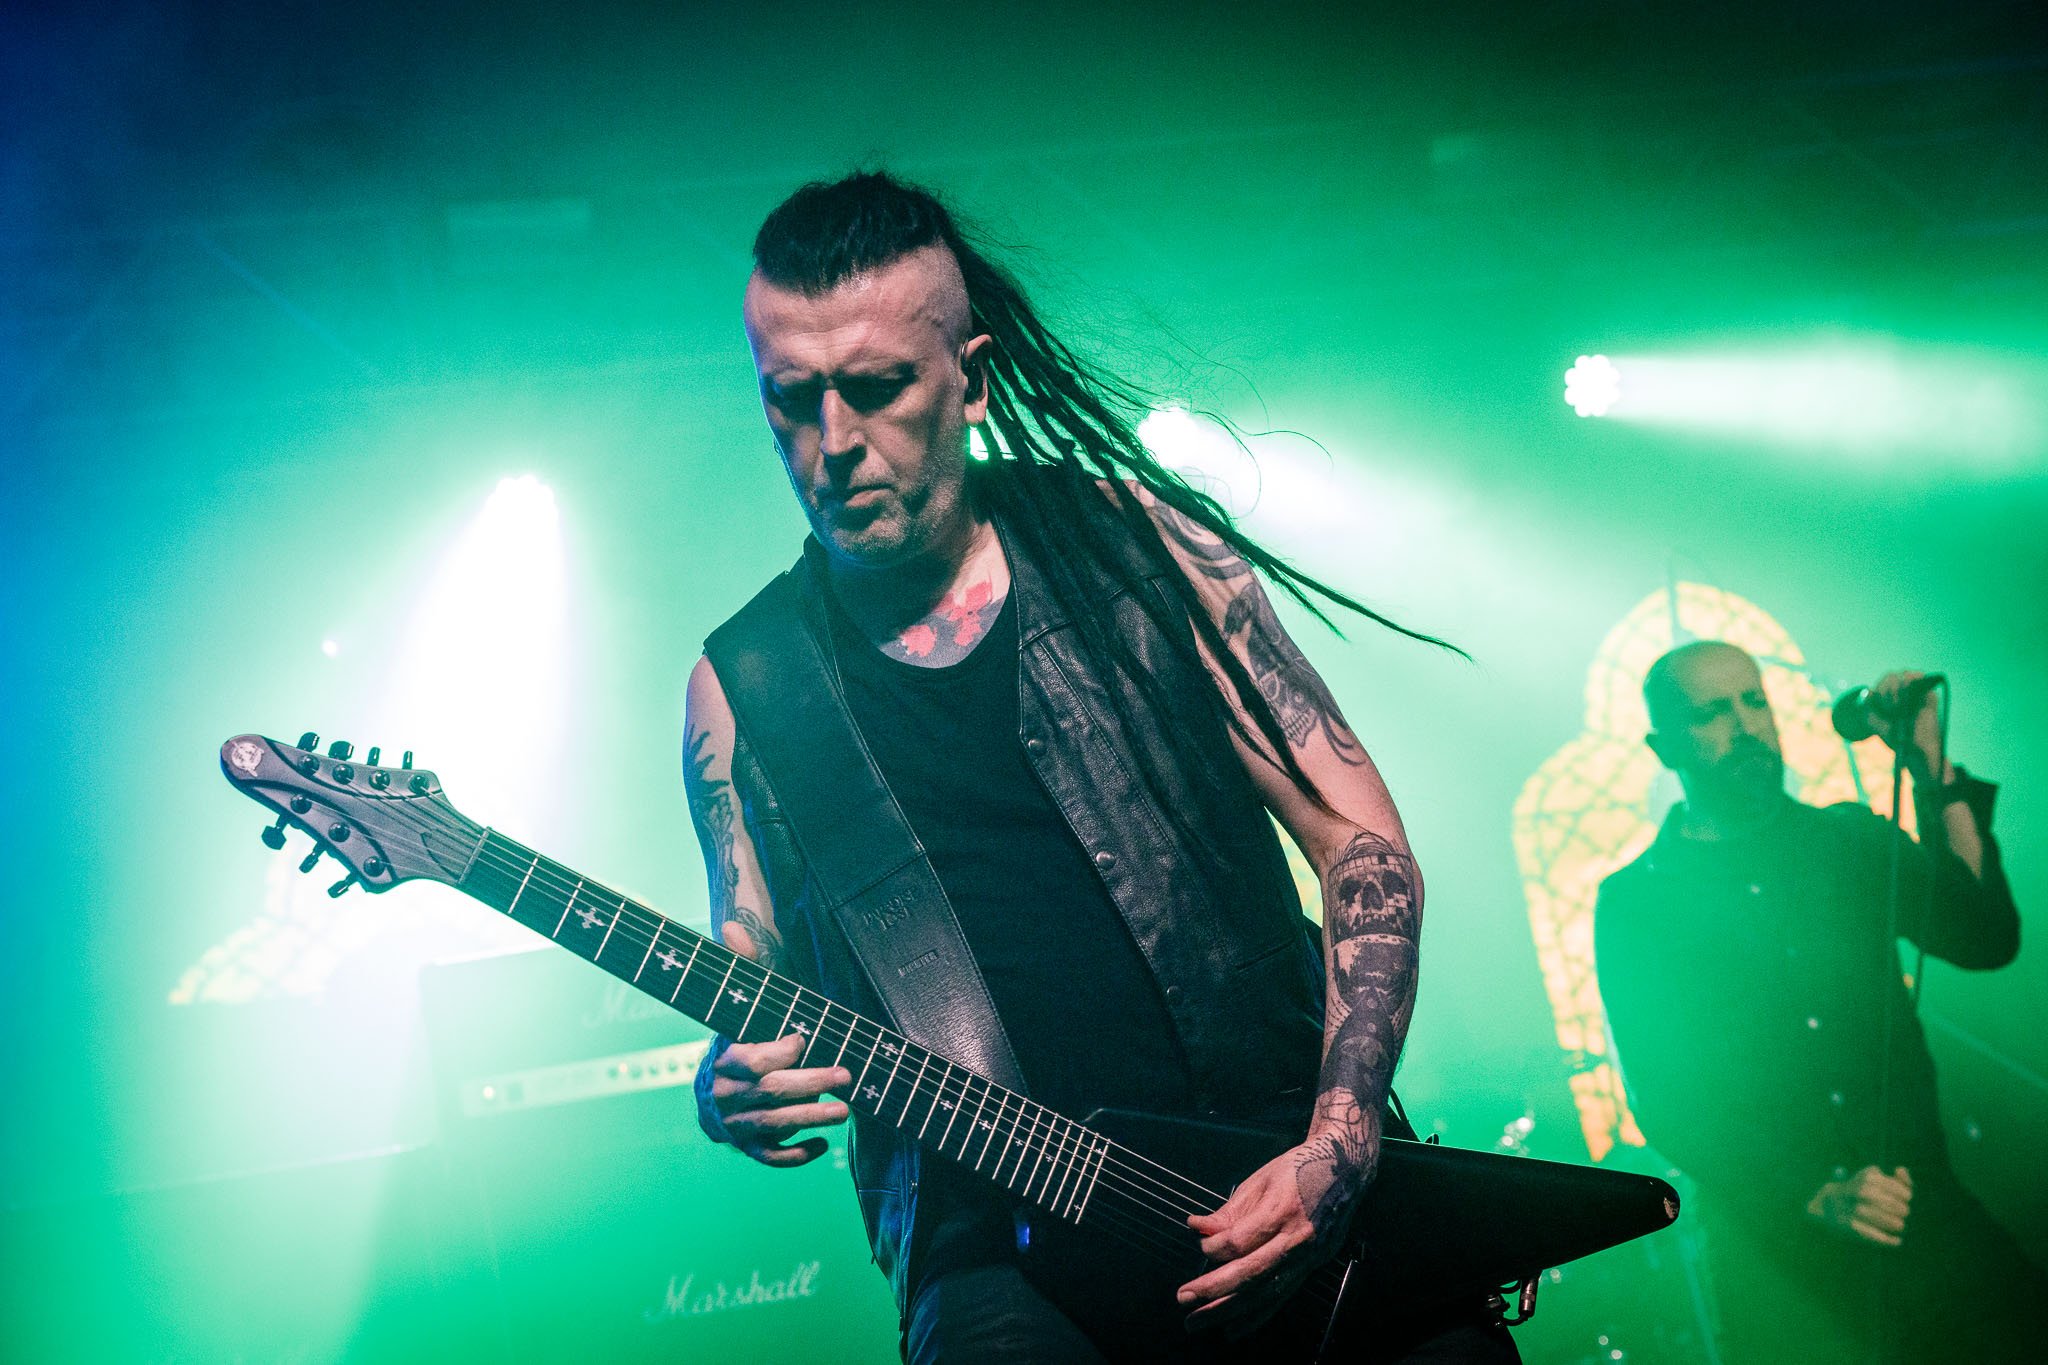 Paradise Lost at the Damnation Festival in Leeds on November 6th